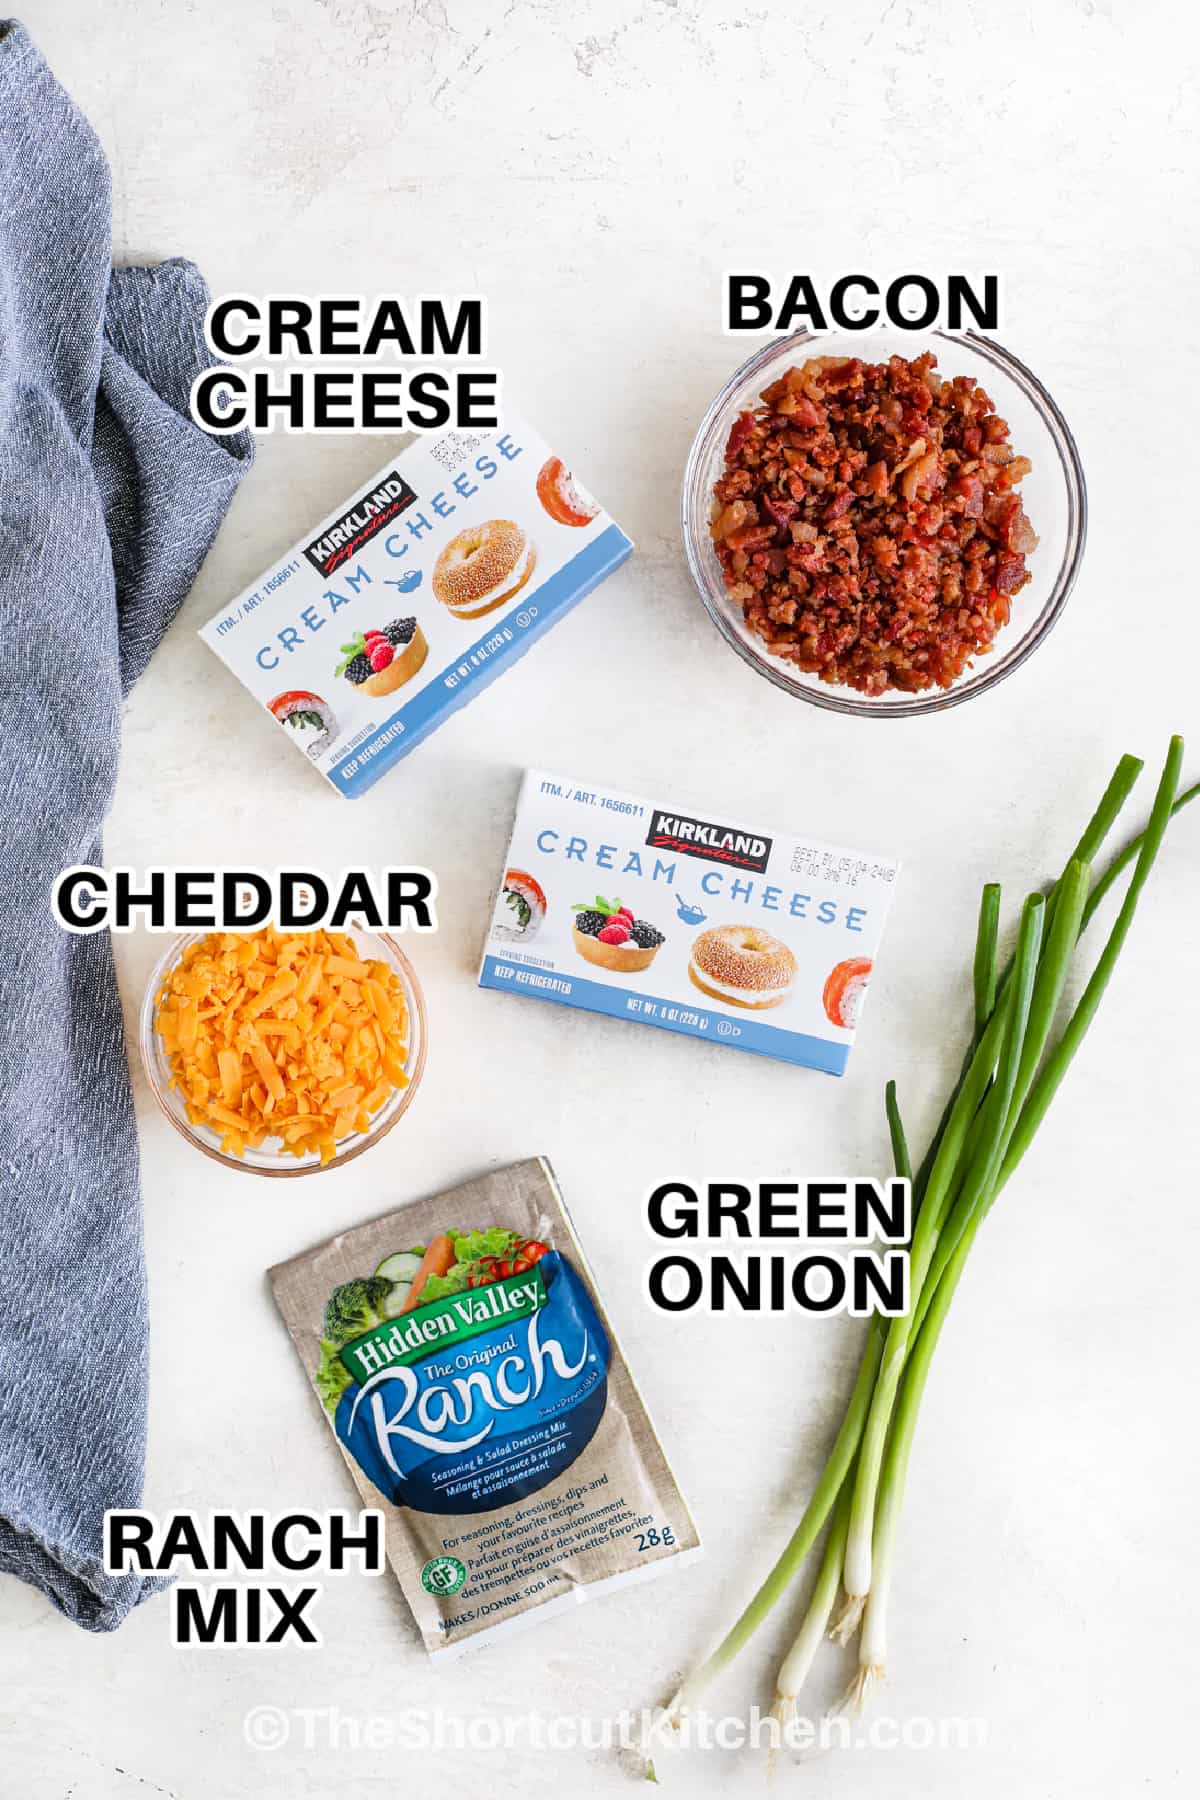 ingredients for Bacon Ranch Cheese Ball including bacon, cream cheese, cheddar, green onion, and ranch mix